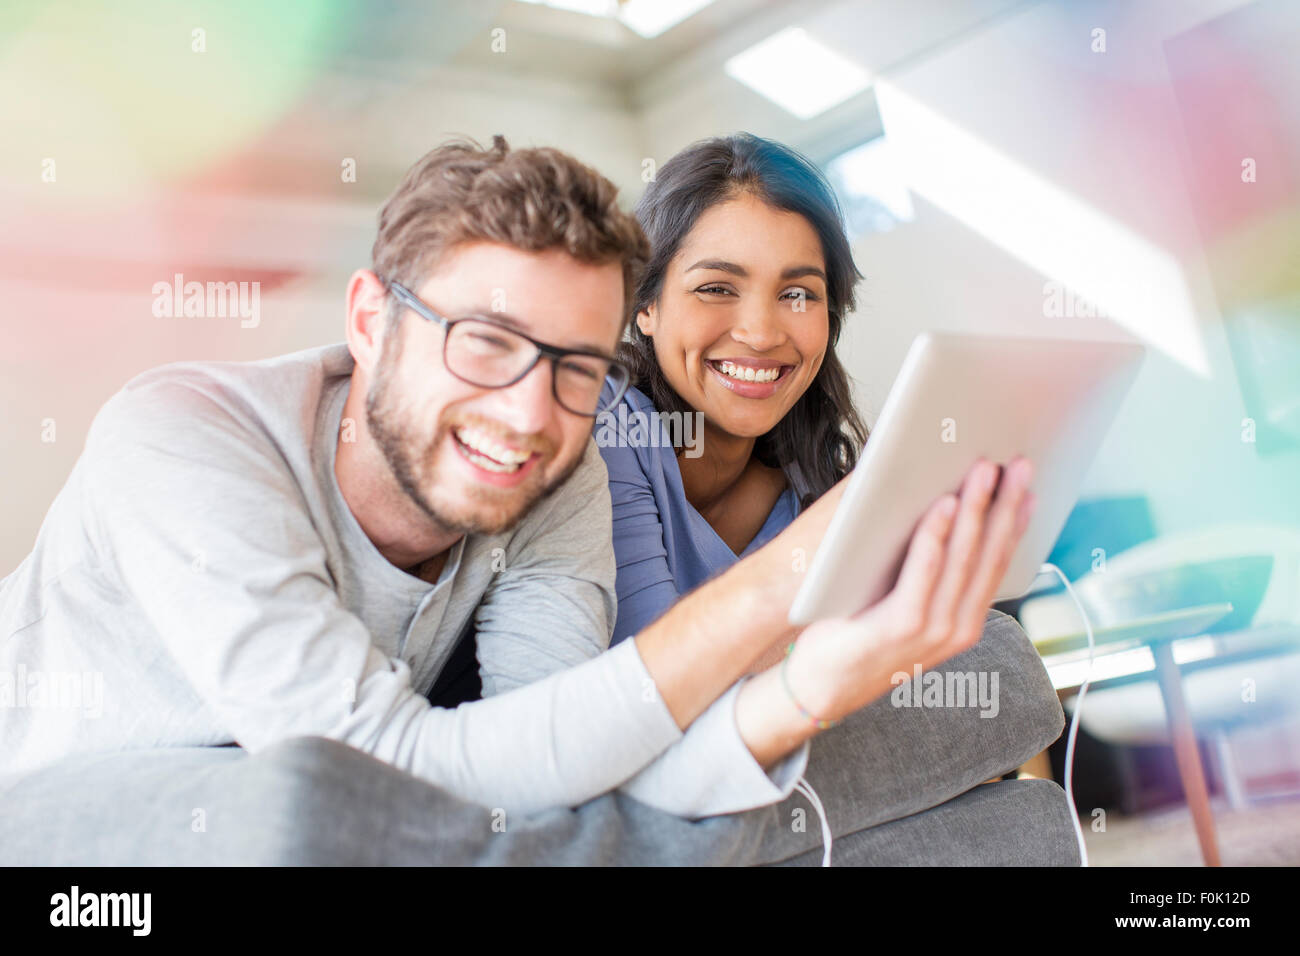 Portrait laughing couple using digital tablet Stock Photo